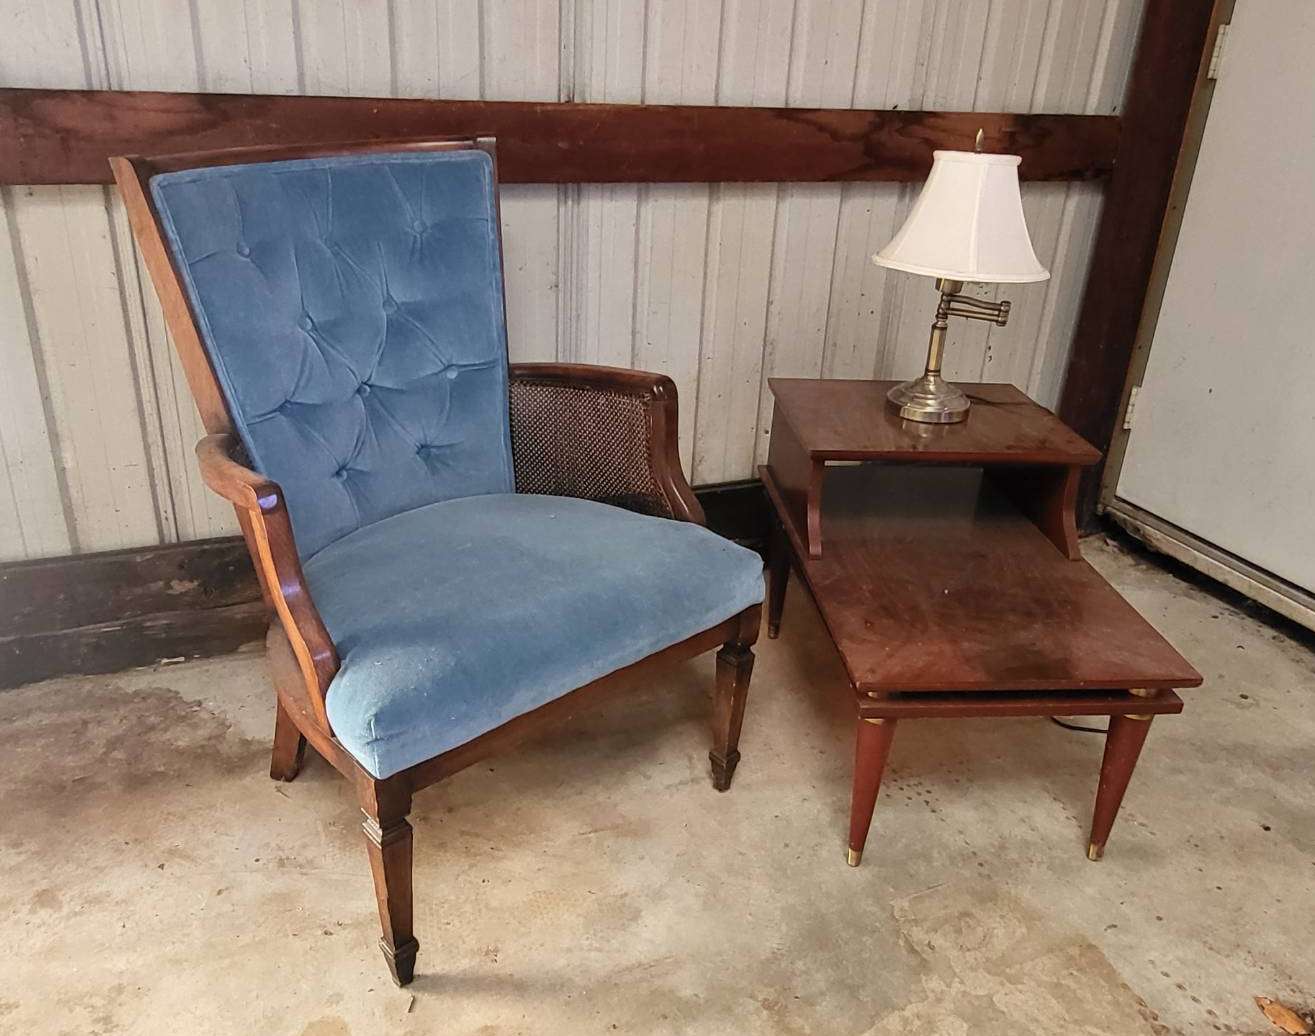 Furniture & Vintage Chairs Buyer in Madison, WI by William H